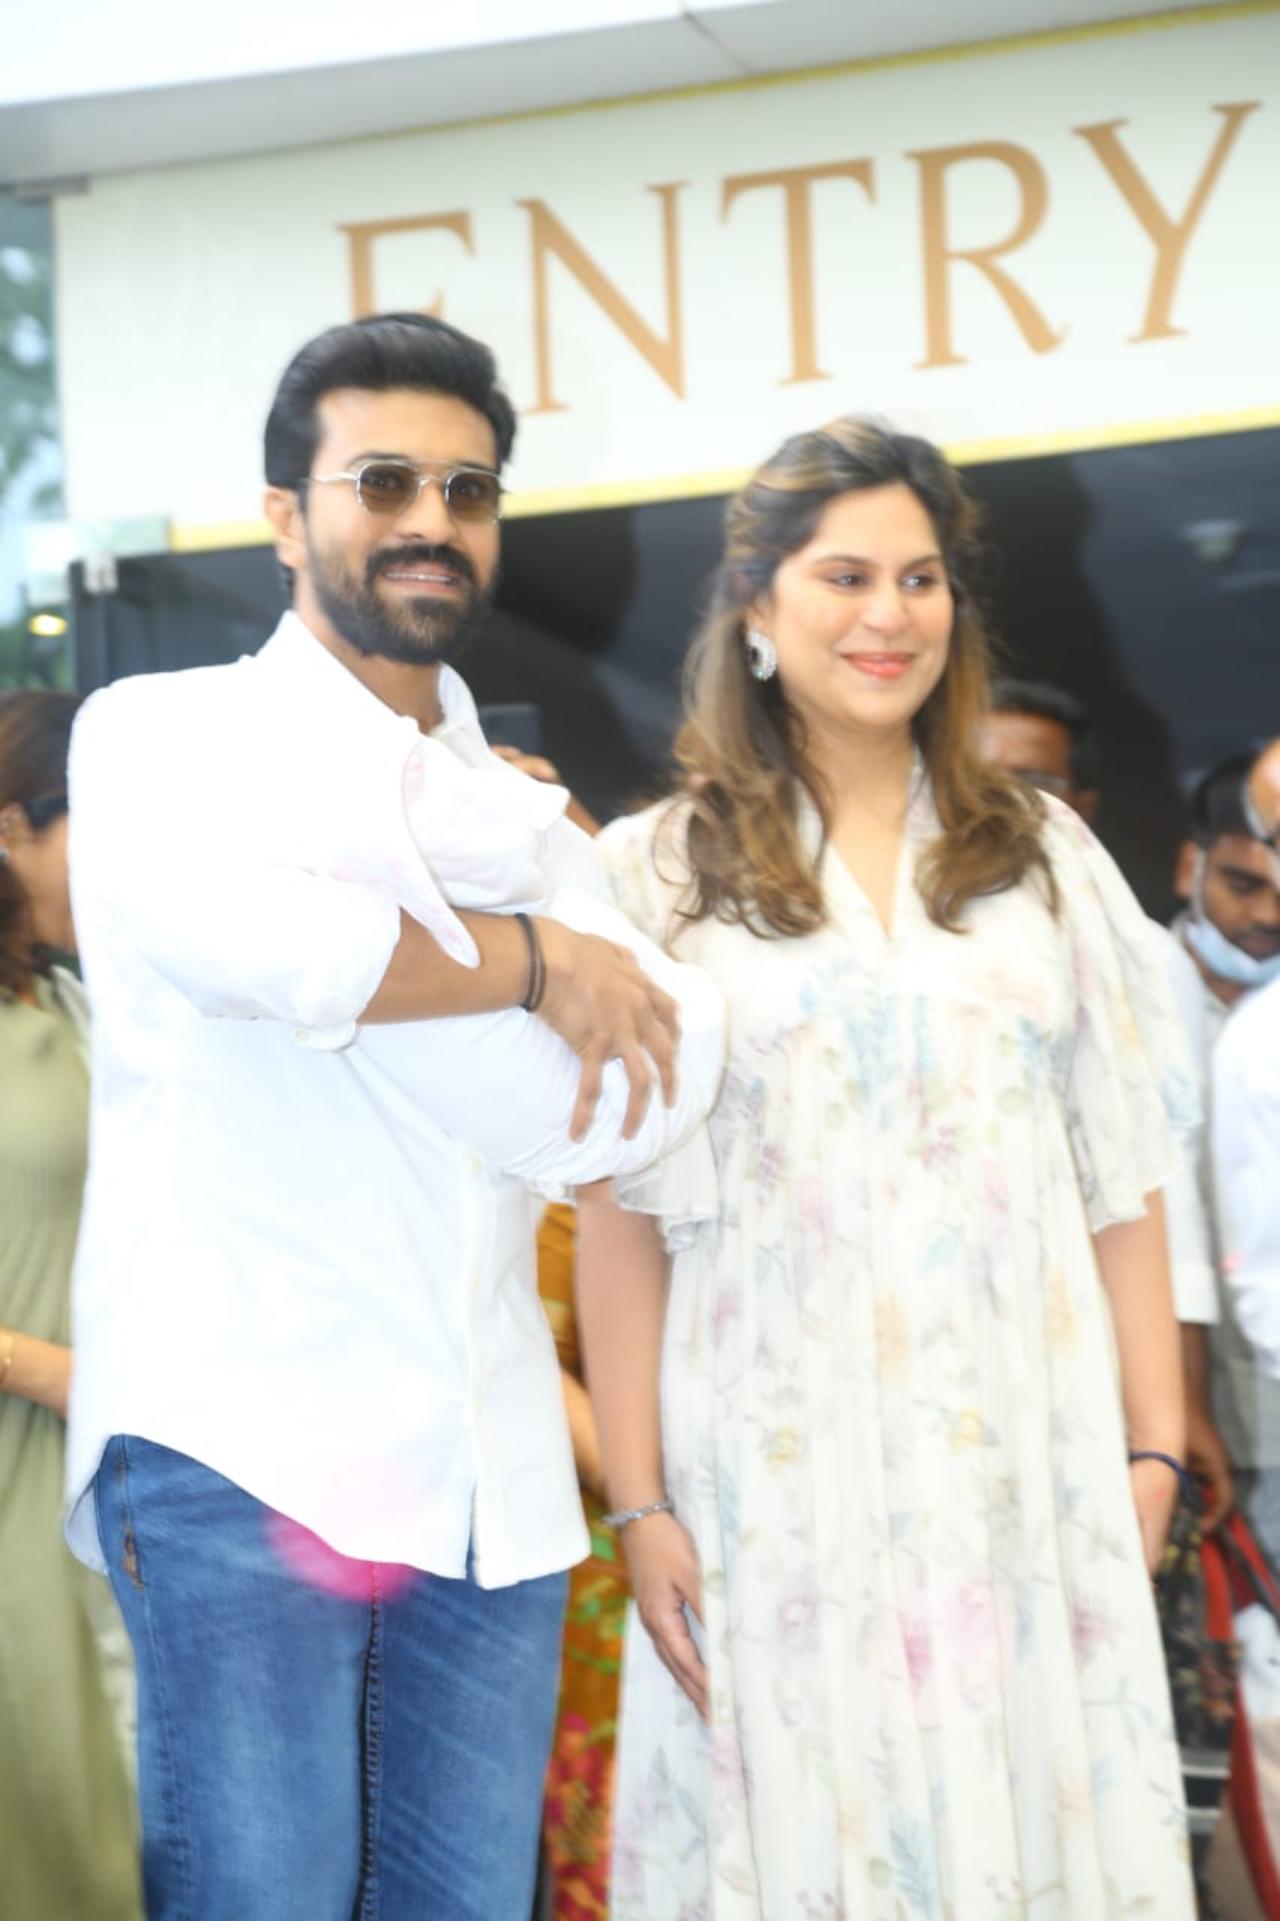 Ram Charan also addressed the media waiting outside the hospital. He thanked the fans for their wishes and celebrations and also spoke about the health of the baby girl and Upasana